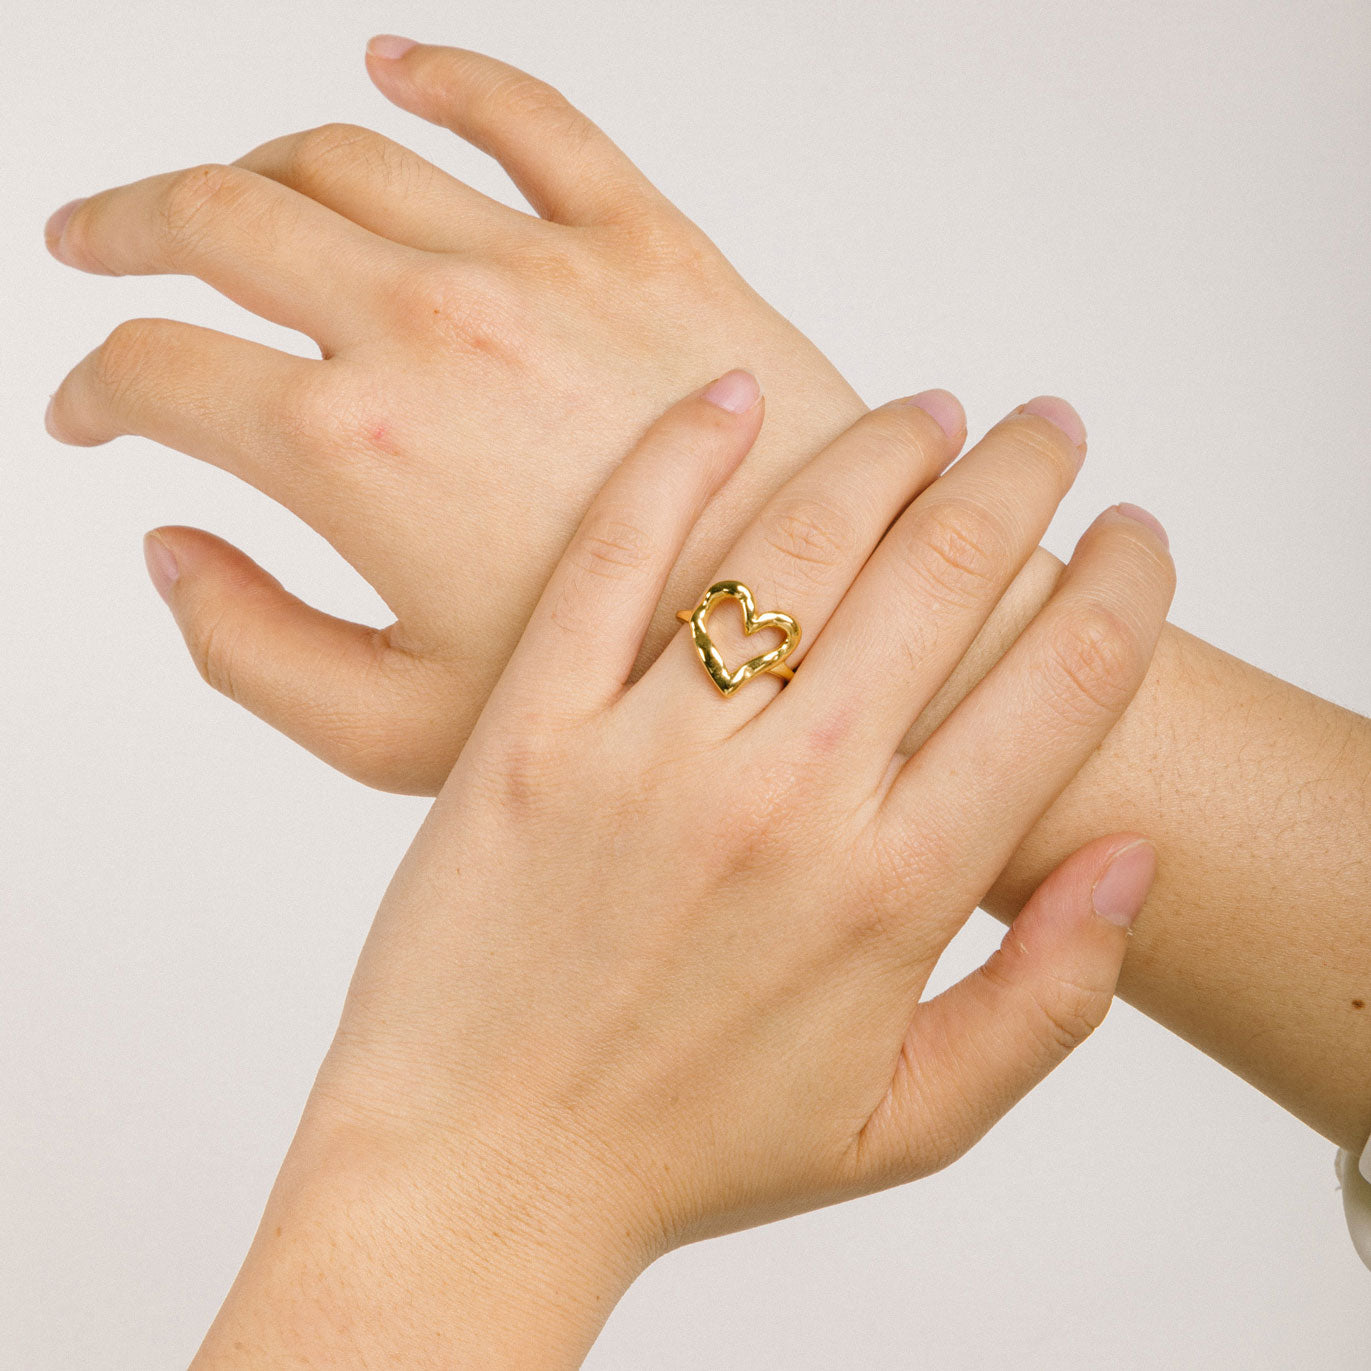 A model wearing the Ai Heart Ring in Gold is crafted with of 14K Gold Plated Stainless Steel, ensuring a durable and non-tarnishing construction. This piece is also water resistant and made without Lead, Nickel, or Cadmium for added safety. This is a single ring, with no ability to adjust.